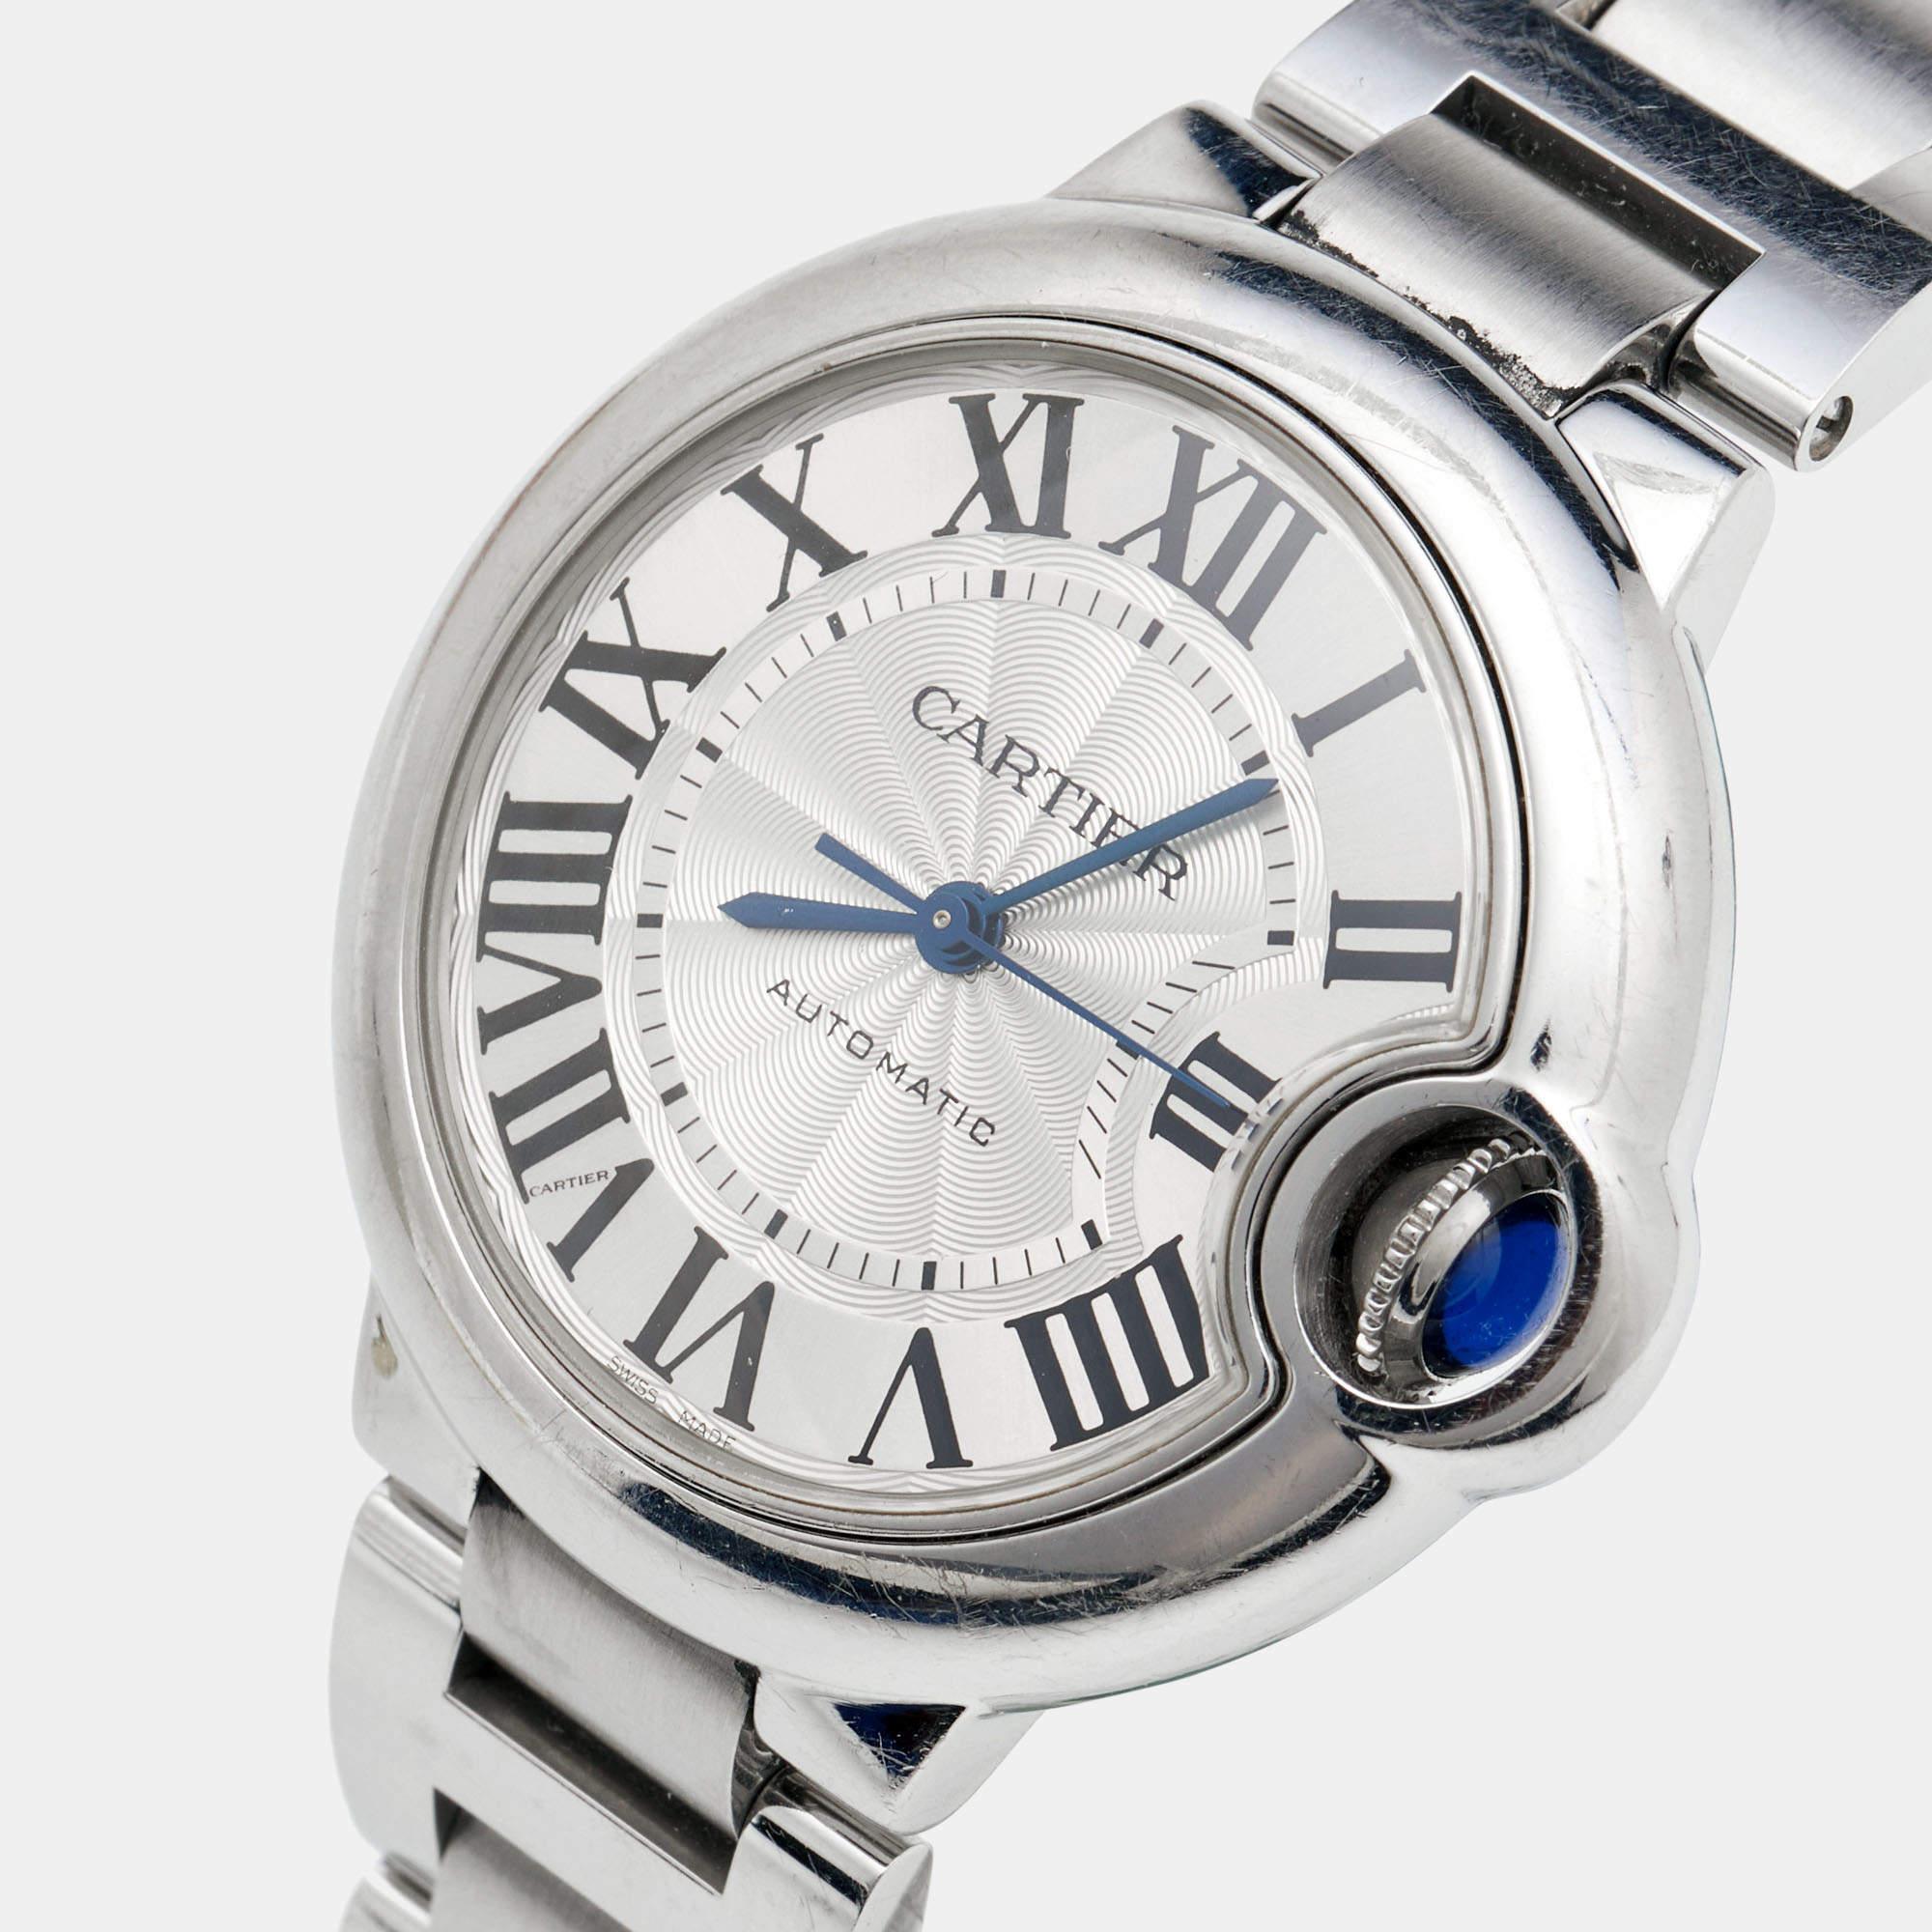 First created in 2007, the Cartier Ballon Bleu watch is a song of details and harmony. The now-iconic watch gets its identity from the guarded blue bubble of the winding crown on the side. The Ballon Bleu W6920071 watch we have here is for women,